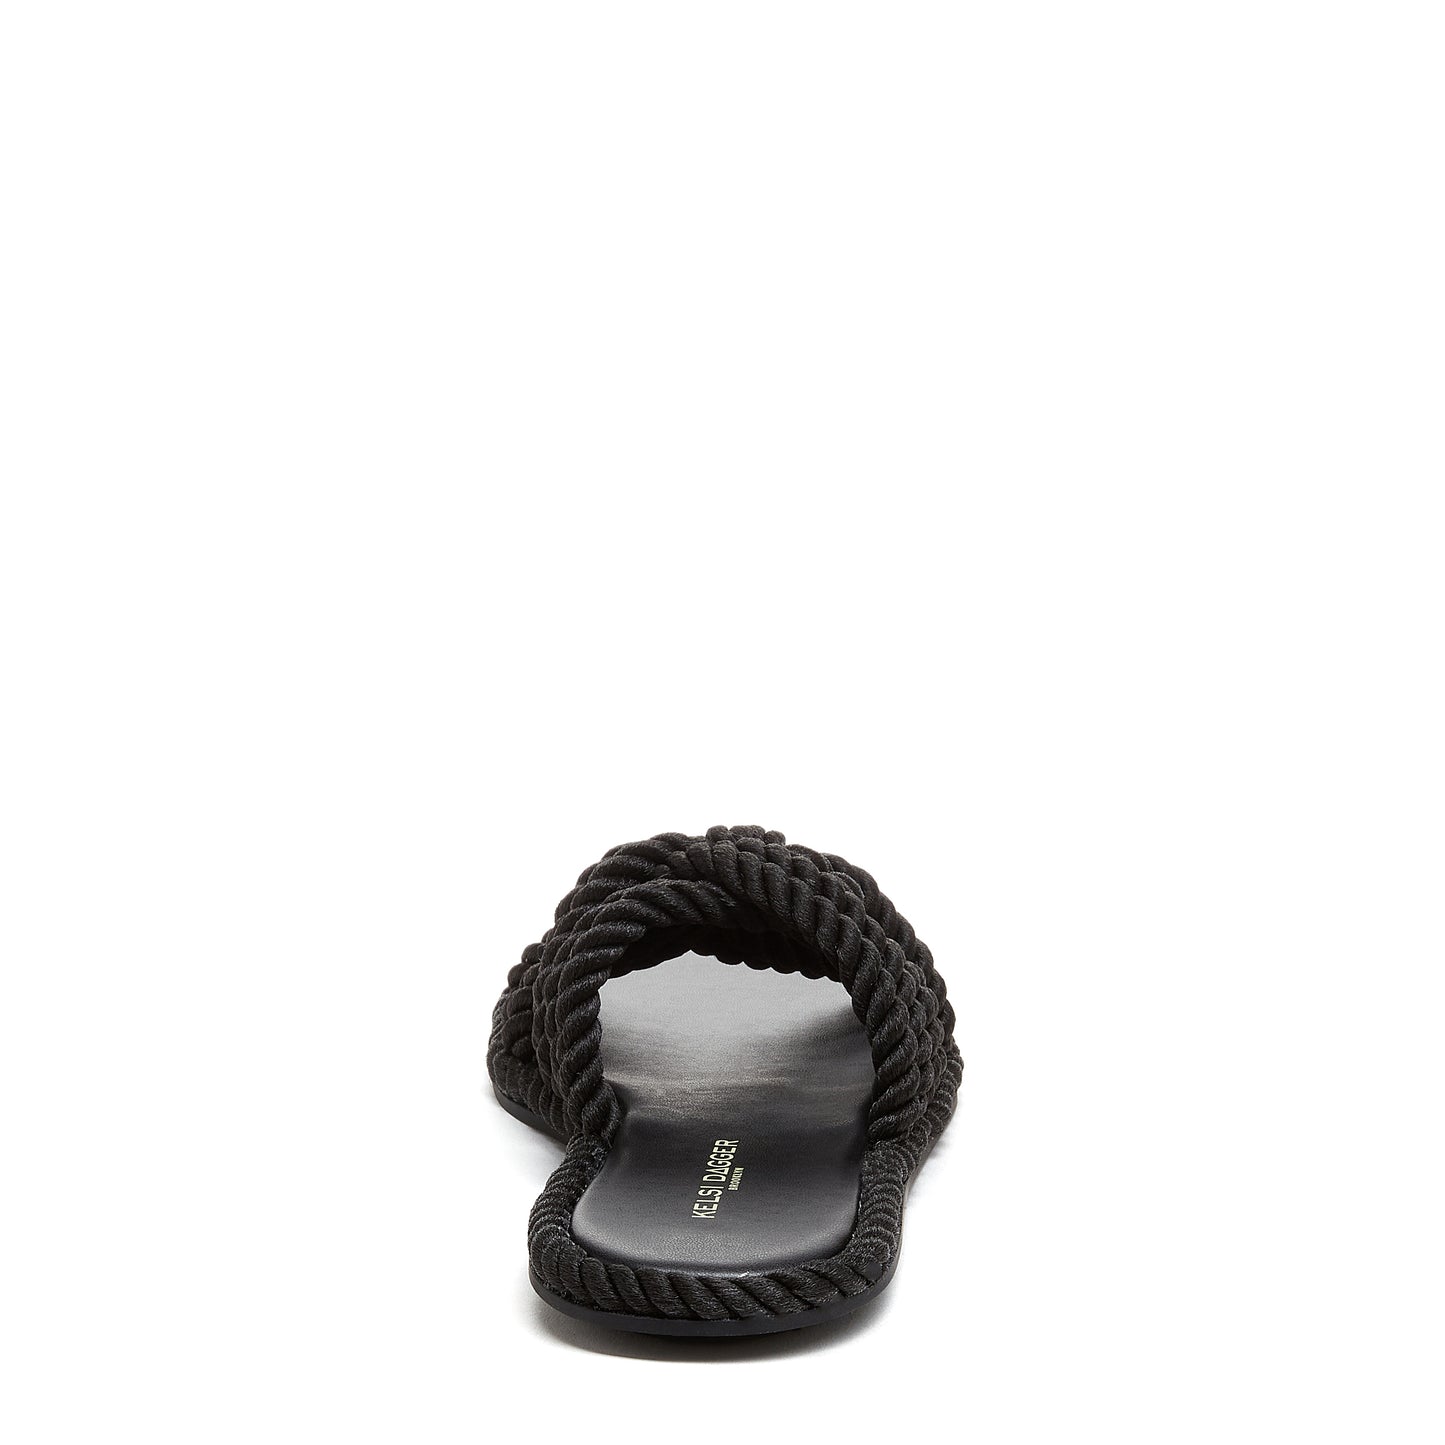 Beachy Black Rope Woven Sandals